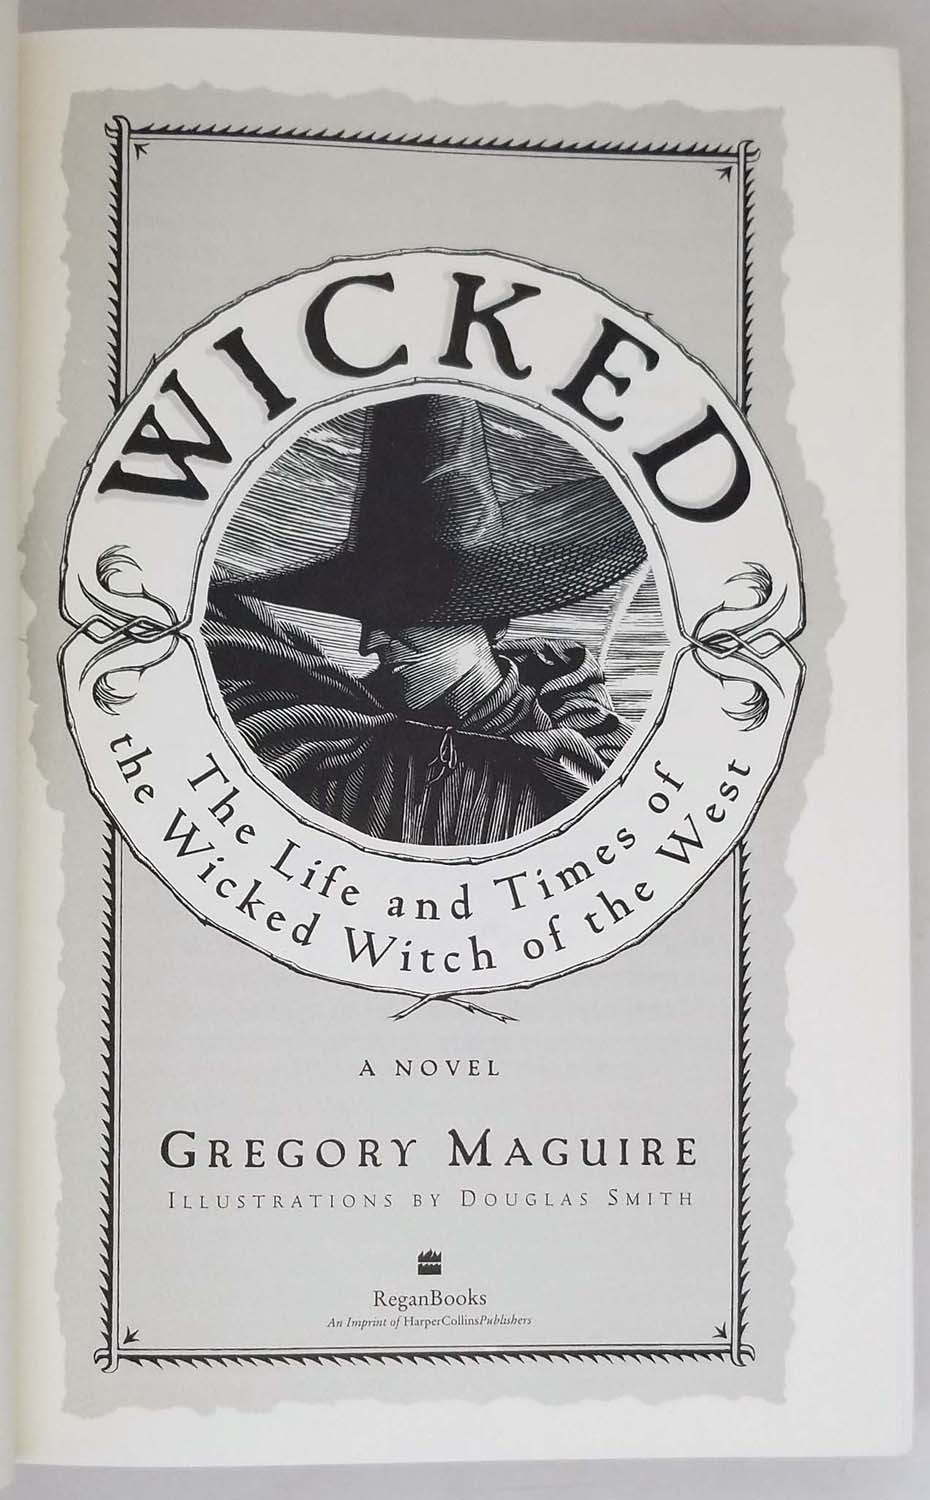 Wicked: The Life and Times of the Wicked Witch of the West - Gregory Maguire 1995 | 1st Edition